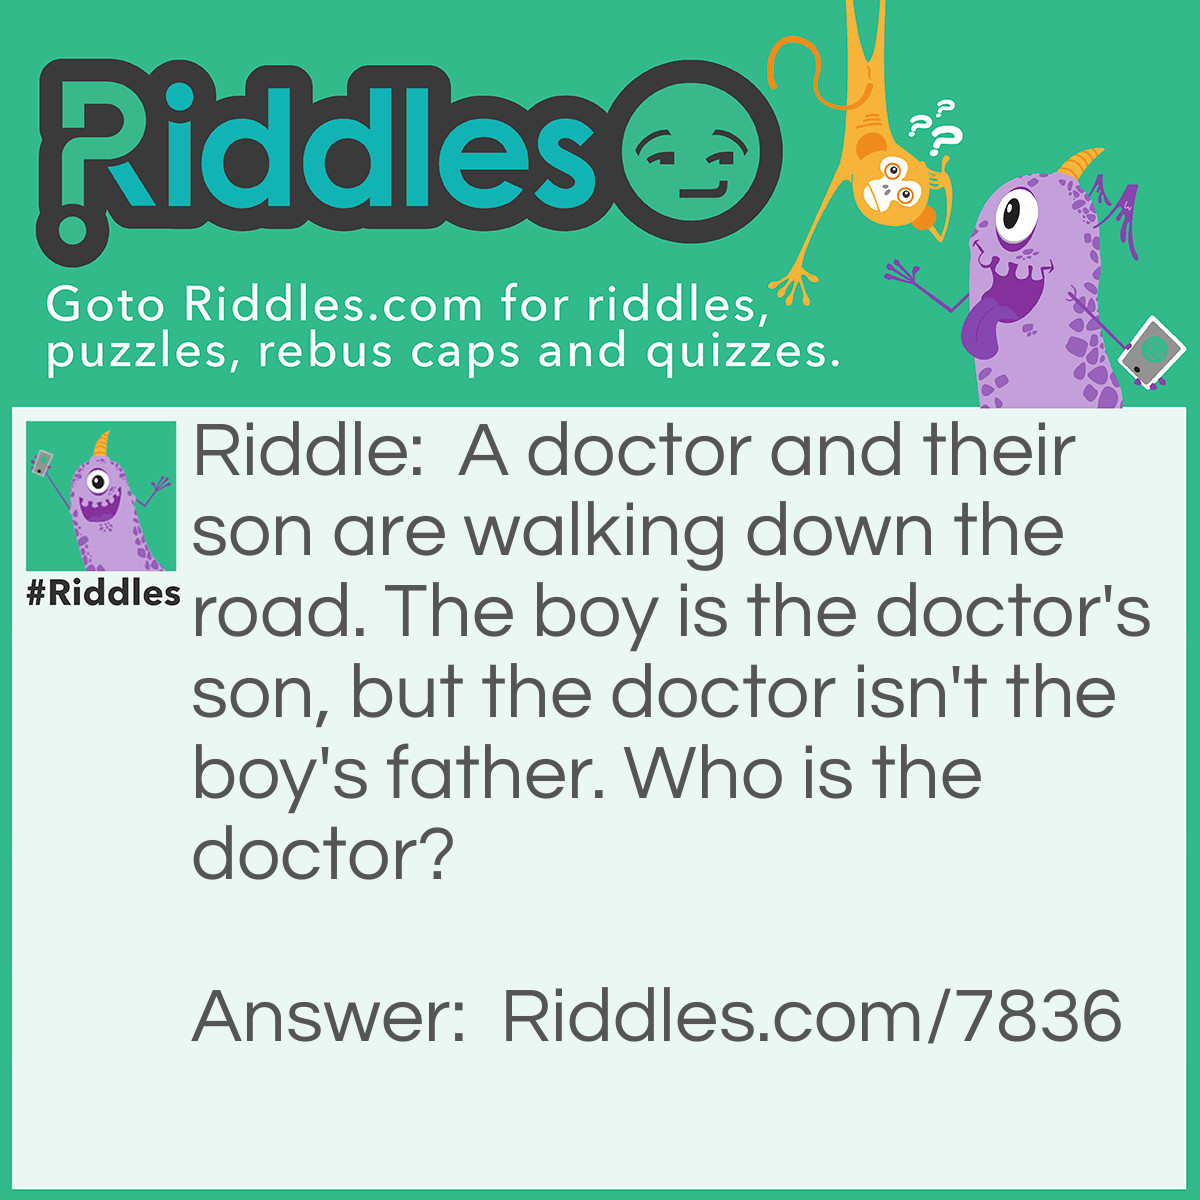 Riddle: A doctor and their son are walking down the road. The boy is the doctor's son, but the doctor isn't the boy's father. Who is the doctor? Answer: The doctor is the boy's mother.